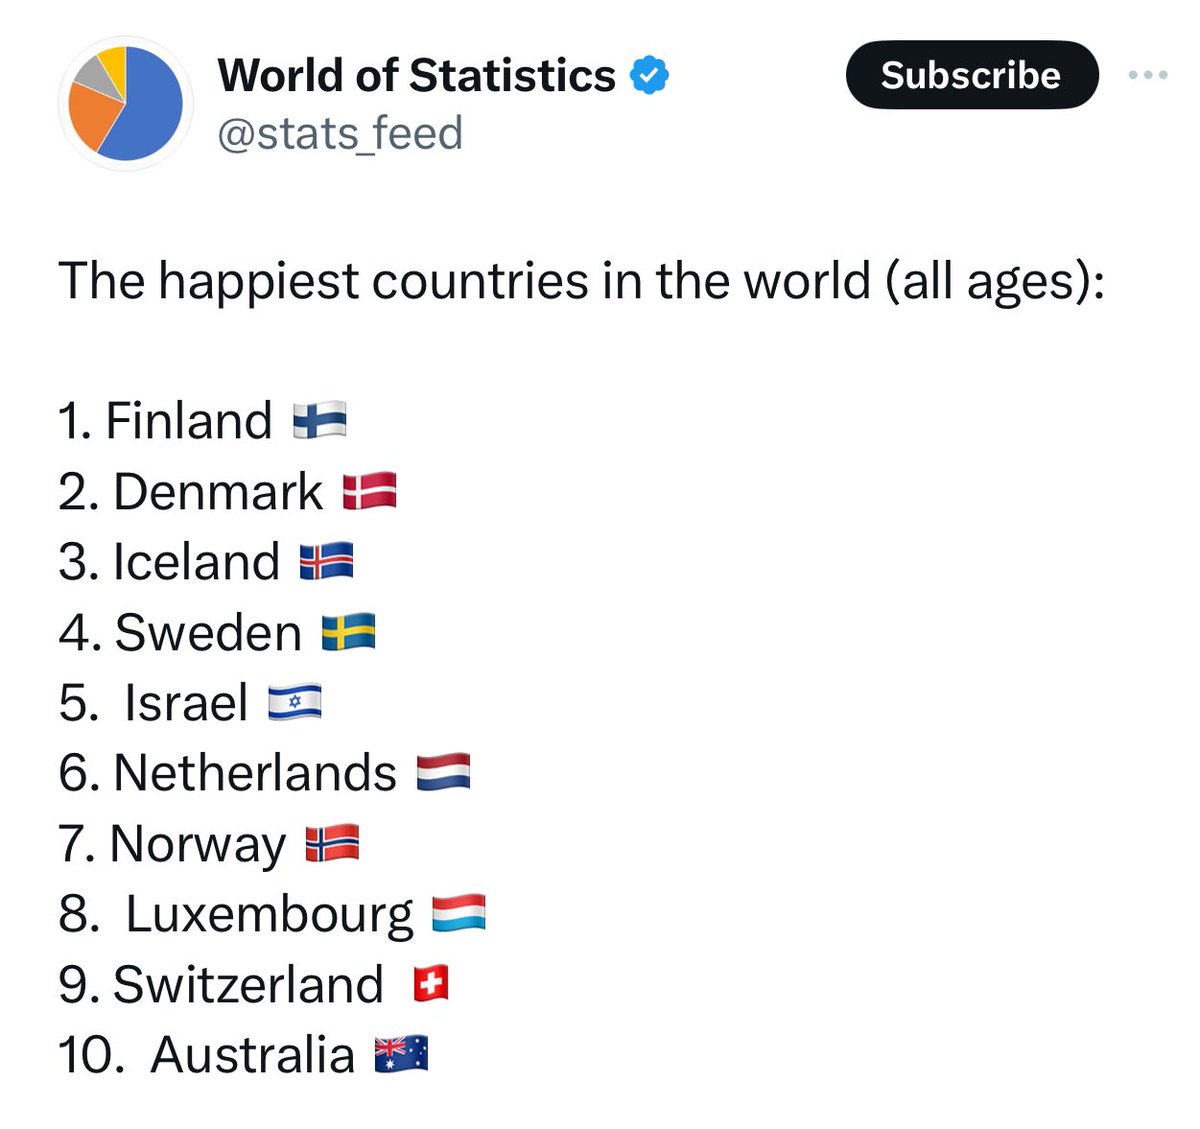 The enemies of Israel will NEVER take away our joy. Israel ranks 5th happiest country in the world. 🌎🇮🇱